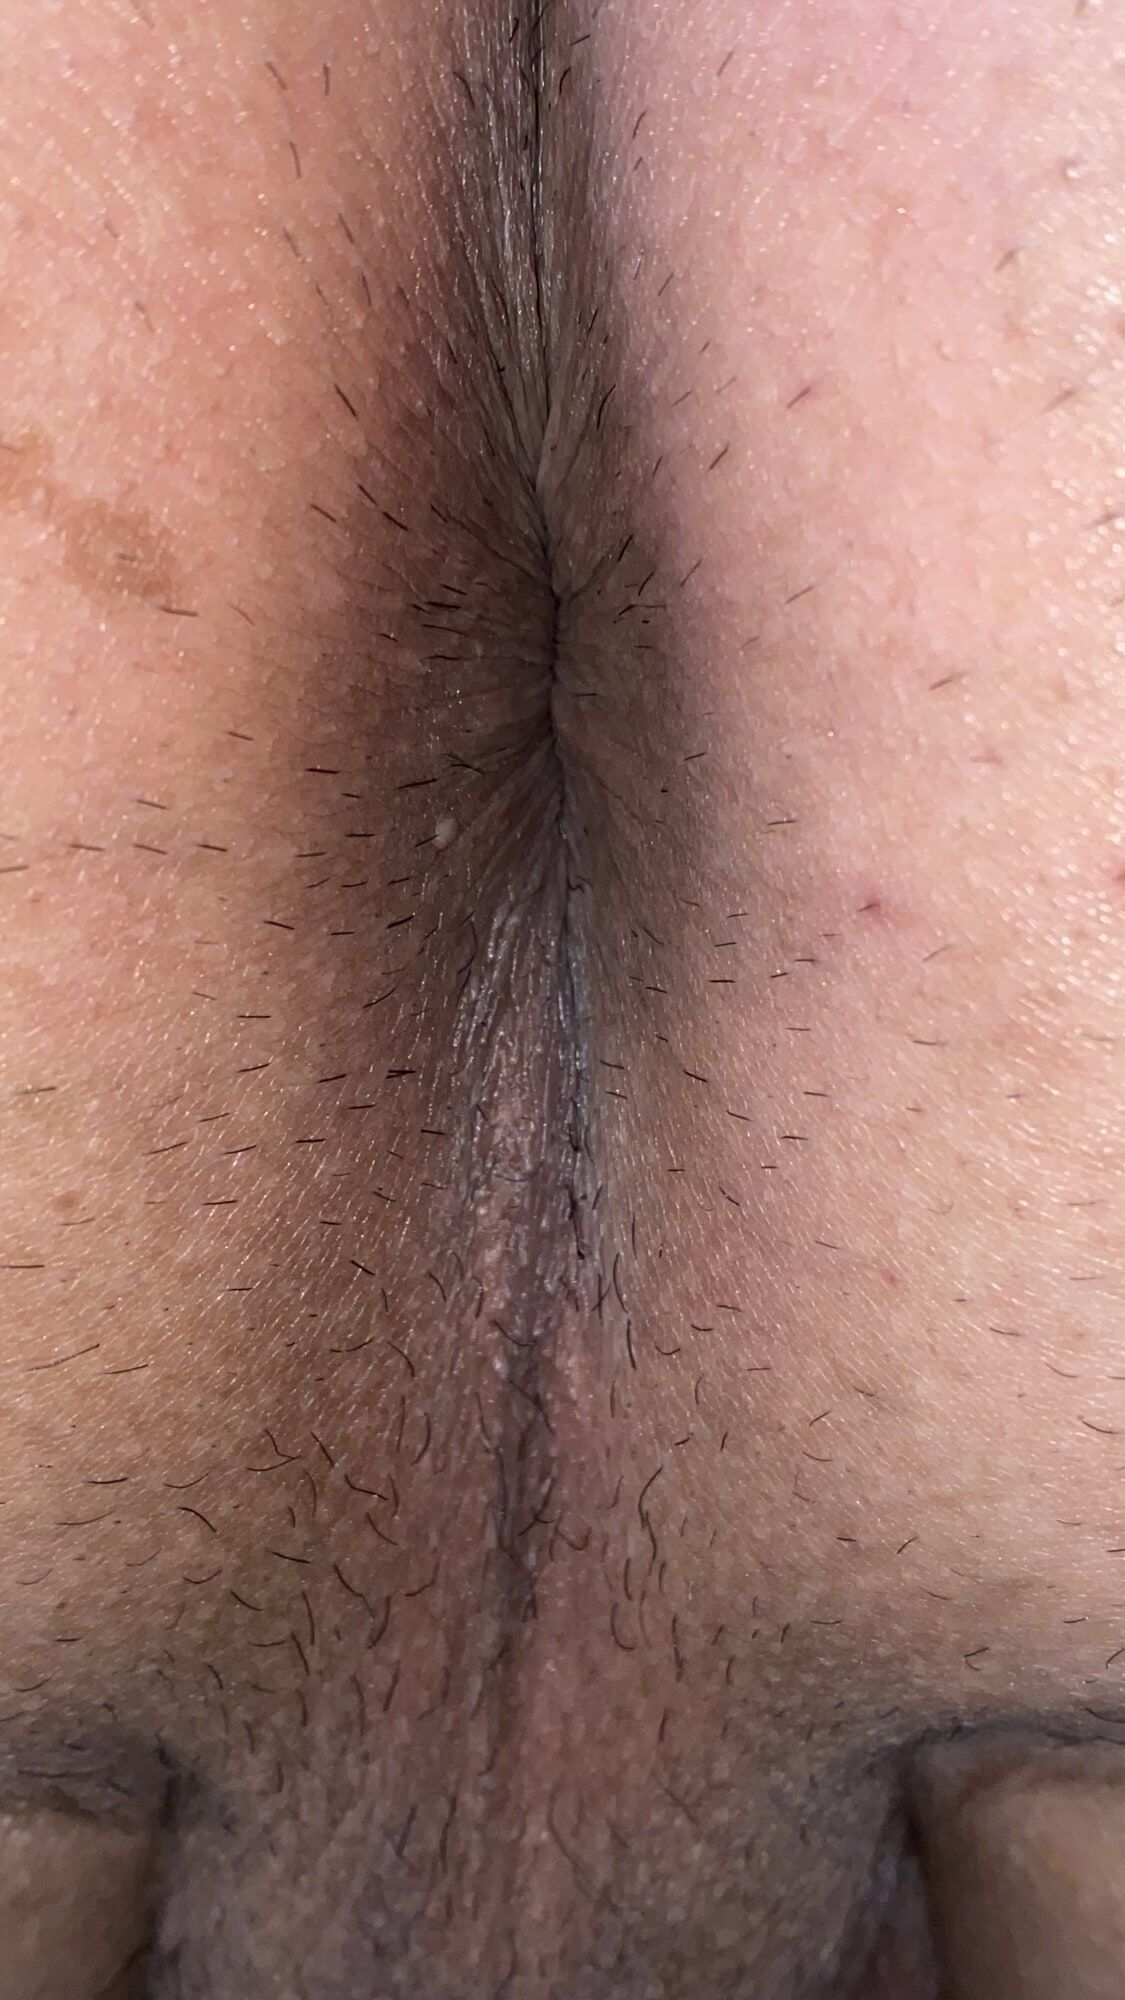 An image of my anus that is clear to every single wrinkle #53